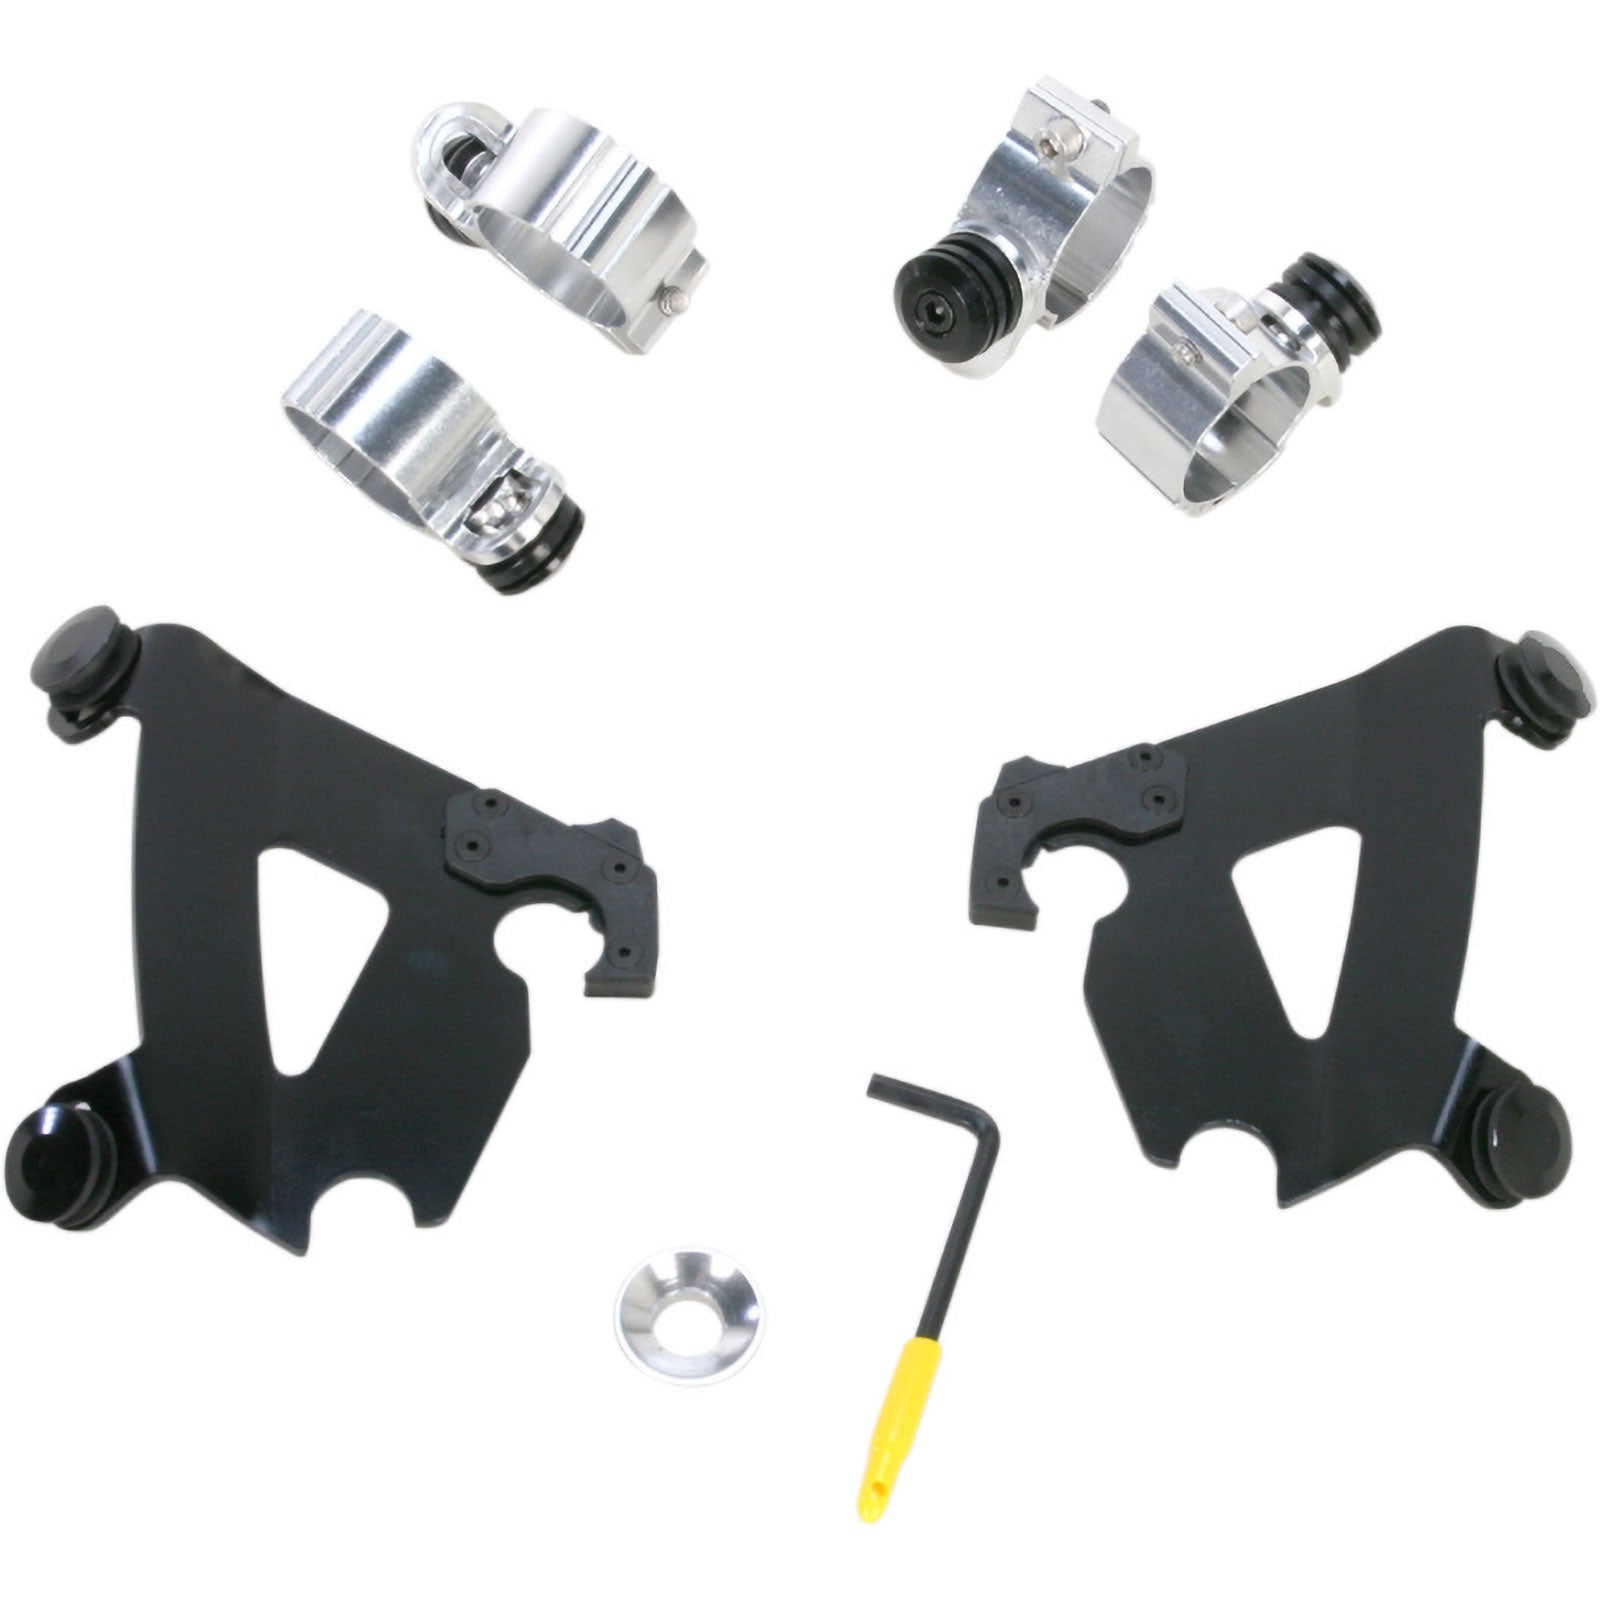 Memphis Shades XL Cafe Fairing Trigger-Lock Mounting Kit Motorcycle Accessories-2320